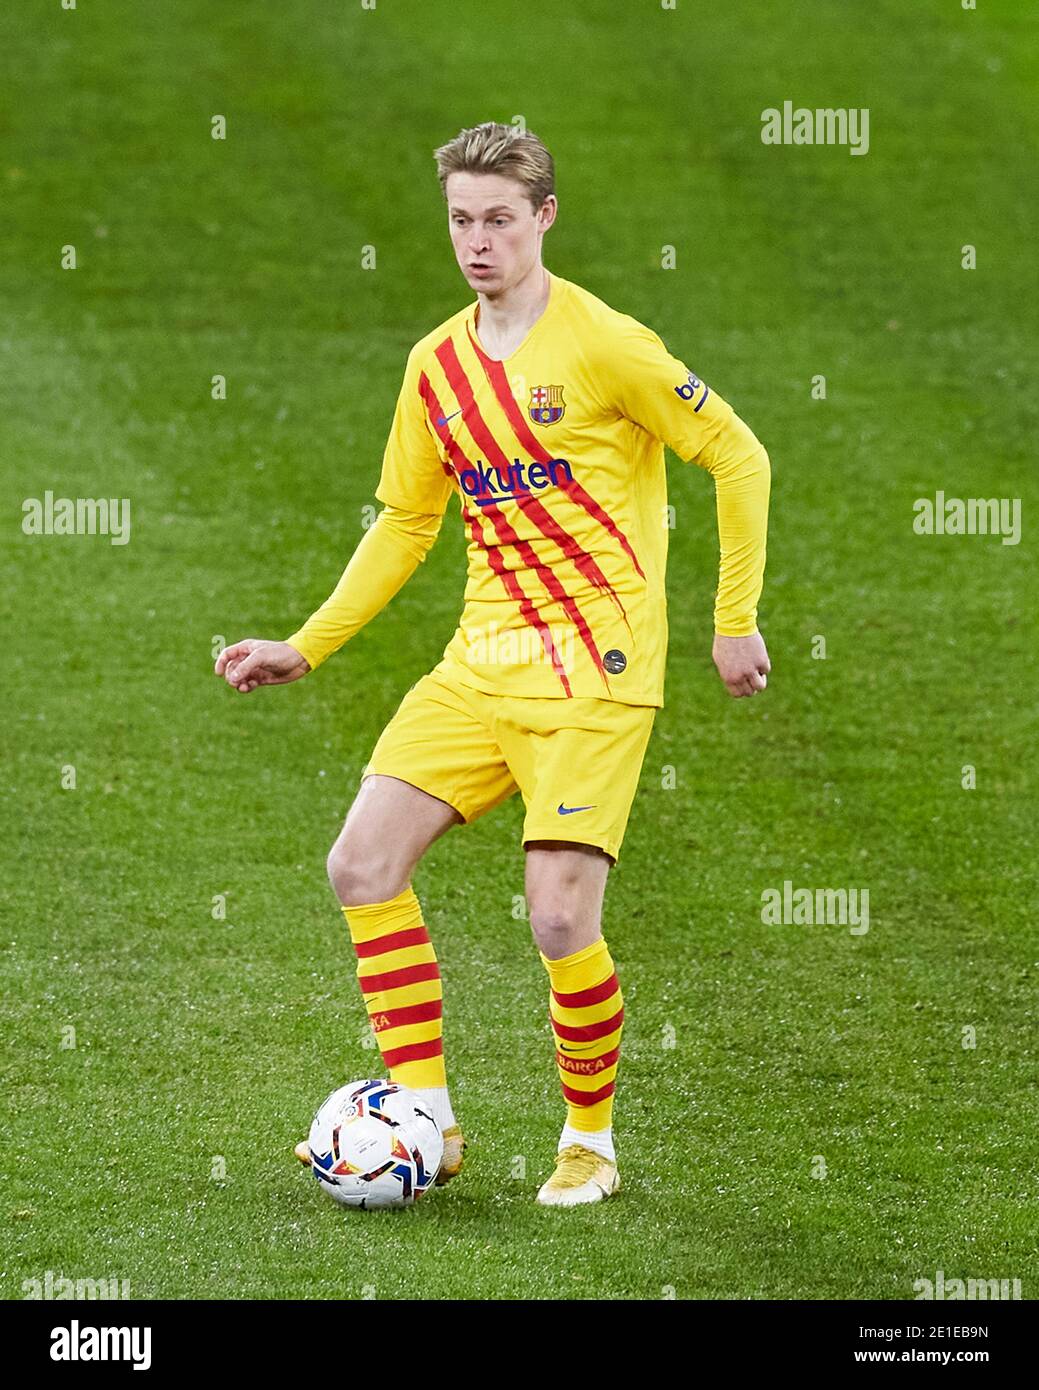 Bilbao, Spain. 06 January, 2021. Frenkie de Jong of FC Barcelona in action during the La Liga match between Athletic Club Bilbao and FC Barcelona played at San Mames Stadium. Credit: Ion Alcoba/Capturasport/Alamy Live News Stock Photo